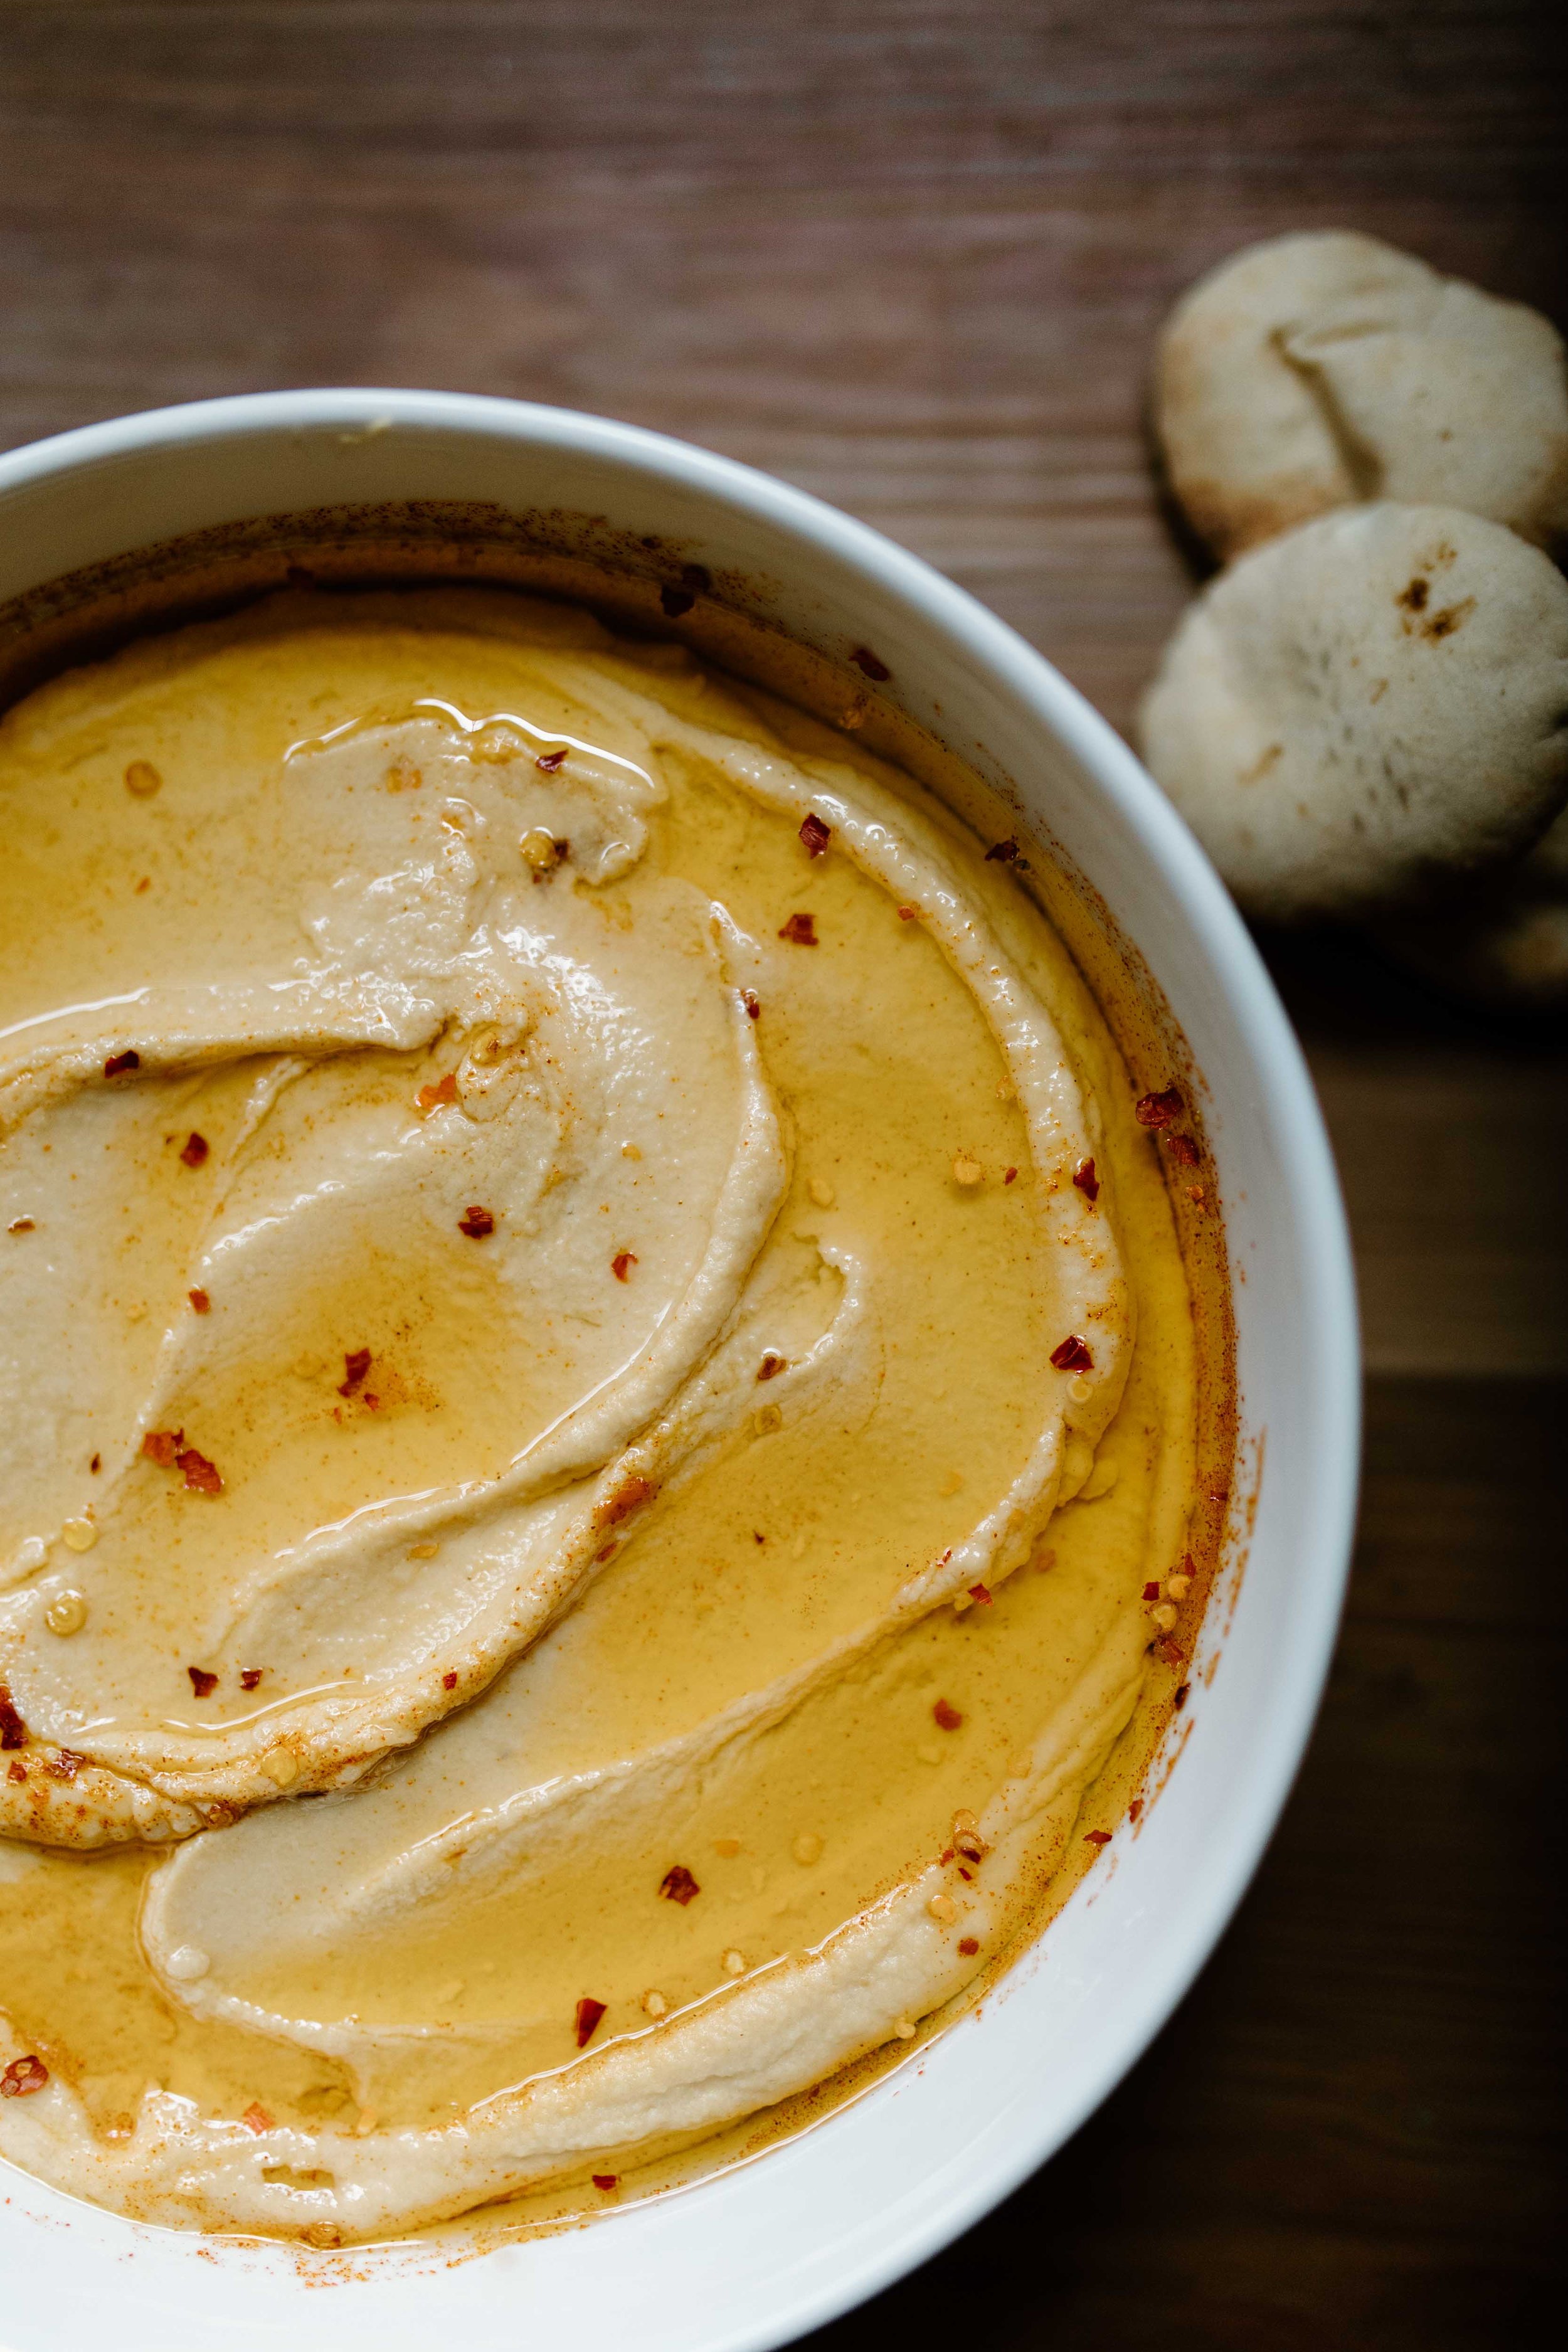 Extra smooth garlic hummus made from chickpeas and tahini